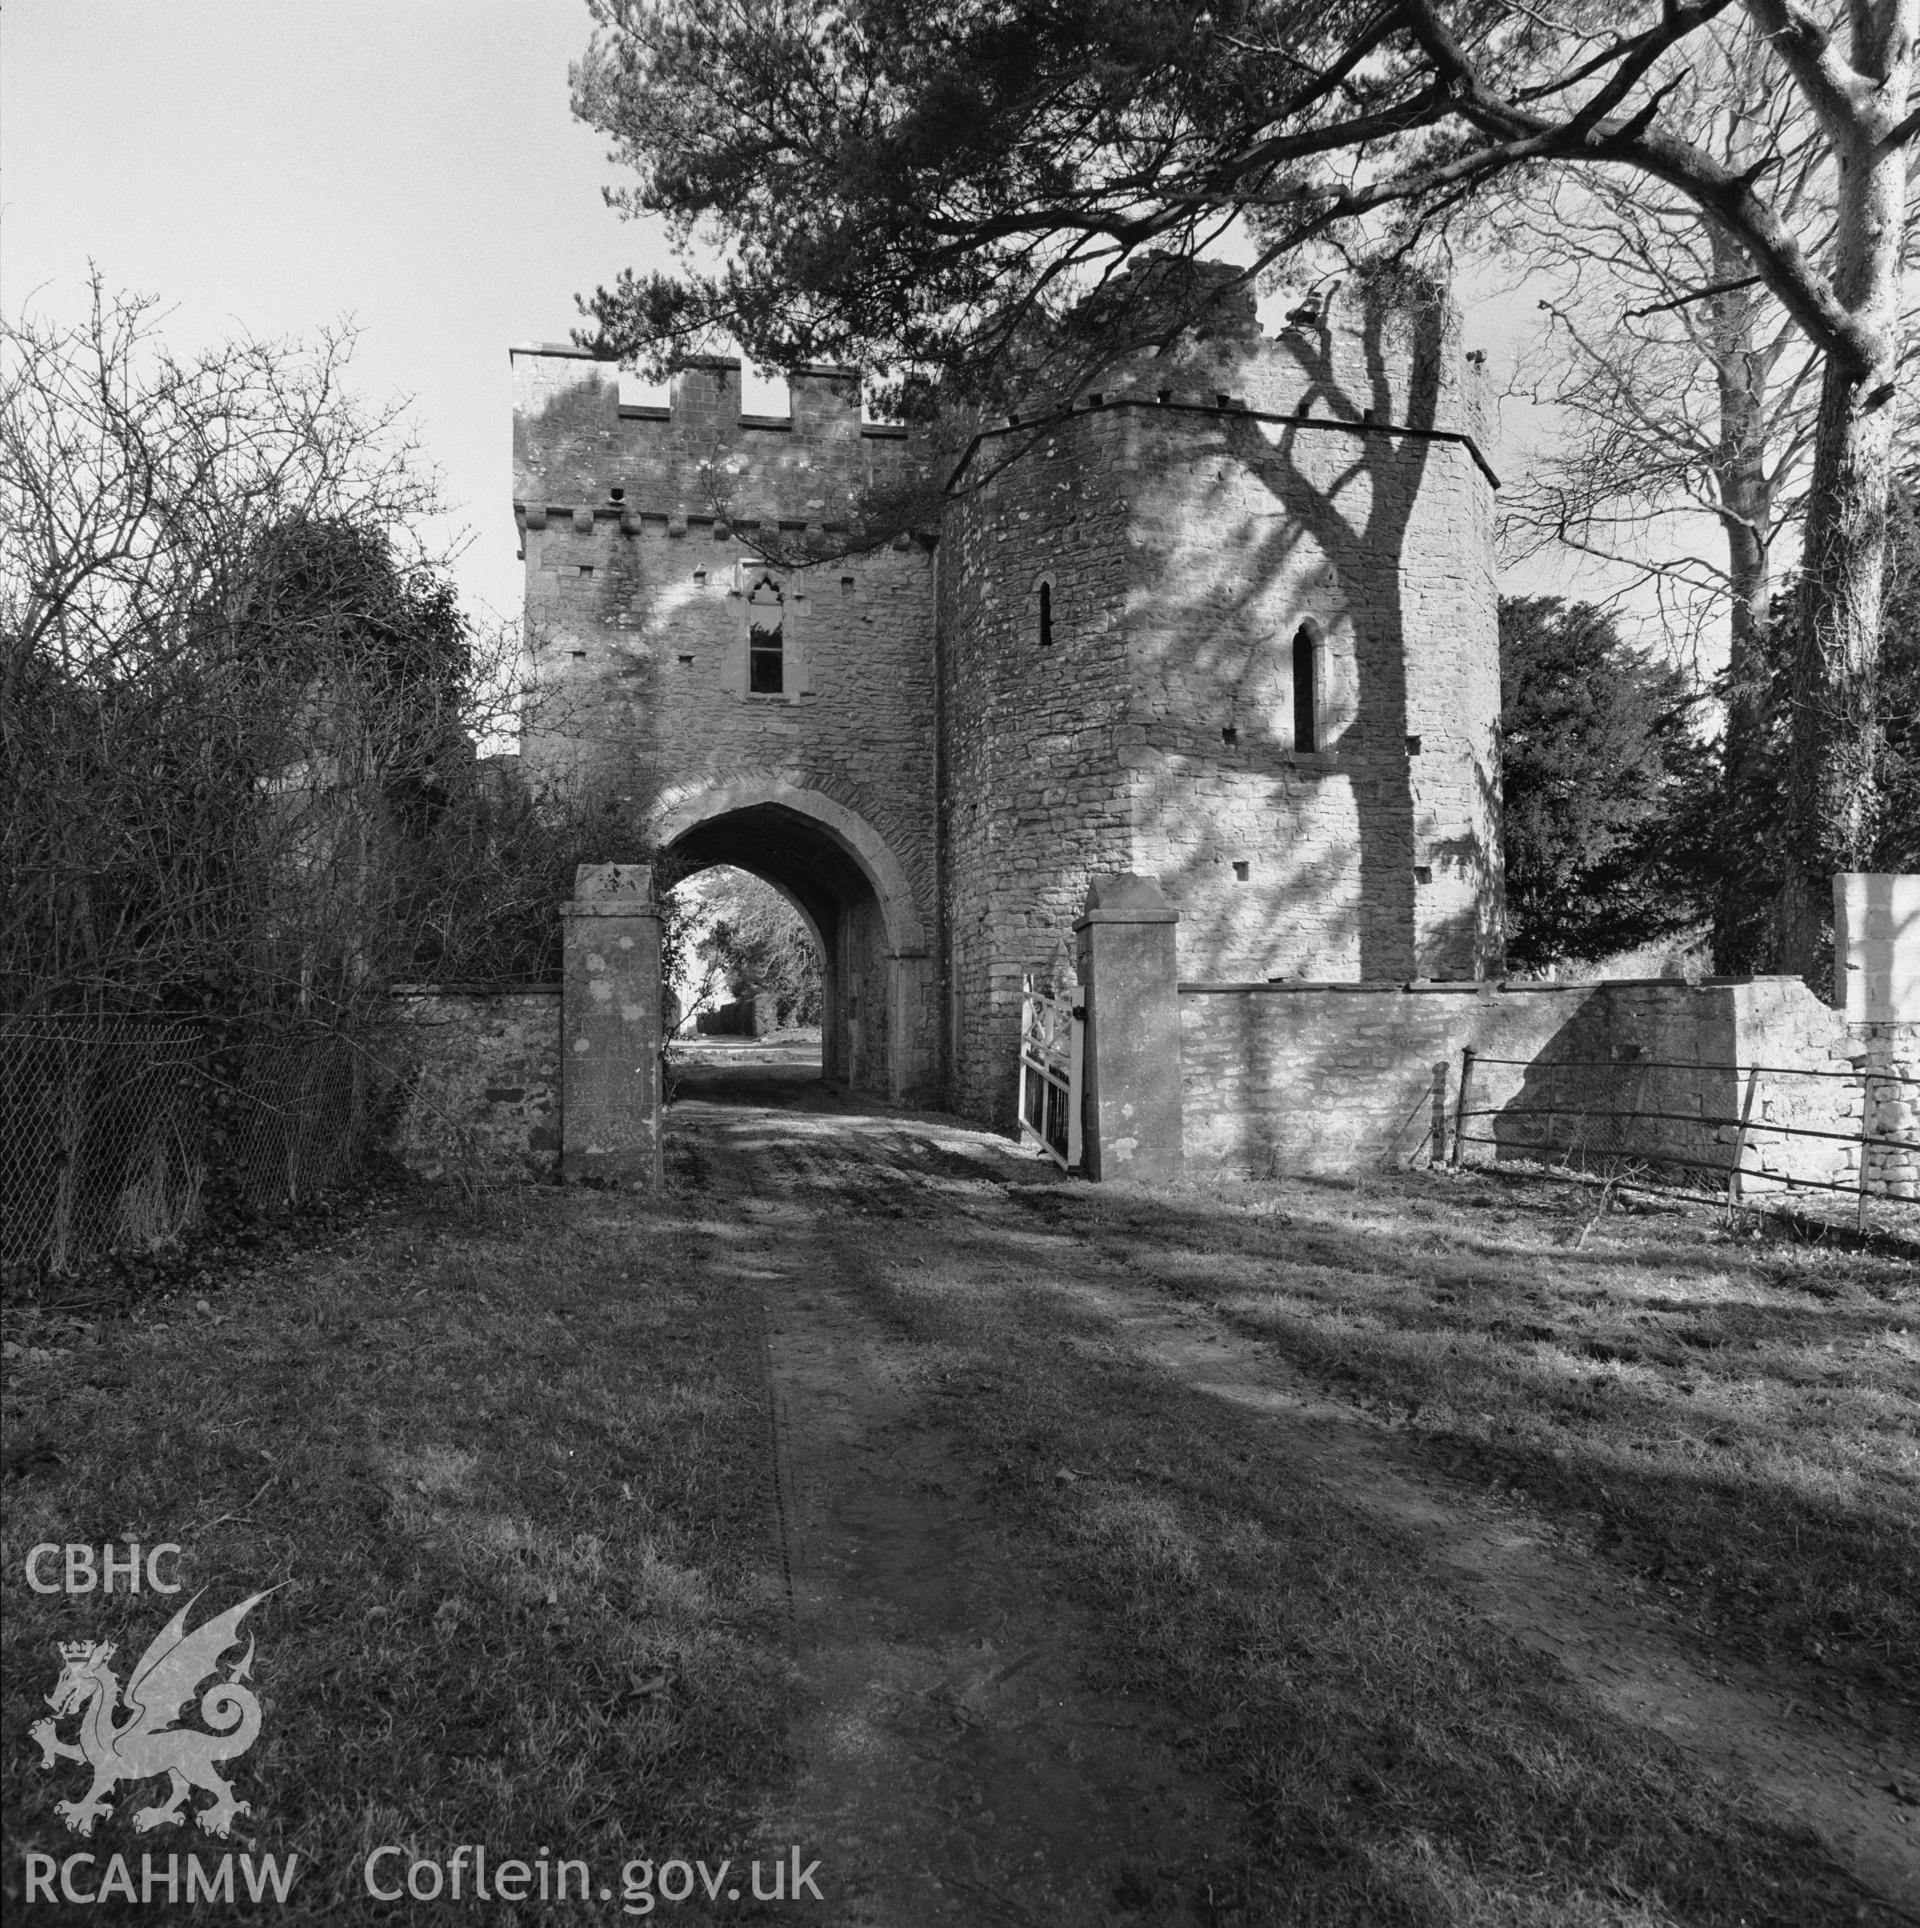 1 b/w print showing exterior view of Ewenny Priory; collated by the former Central Office of Information.